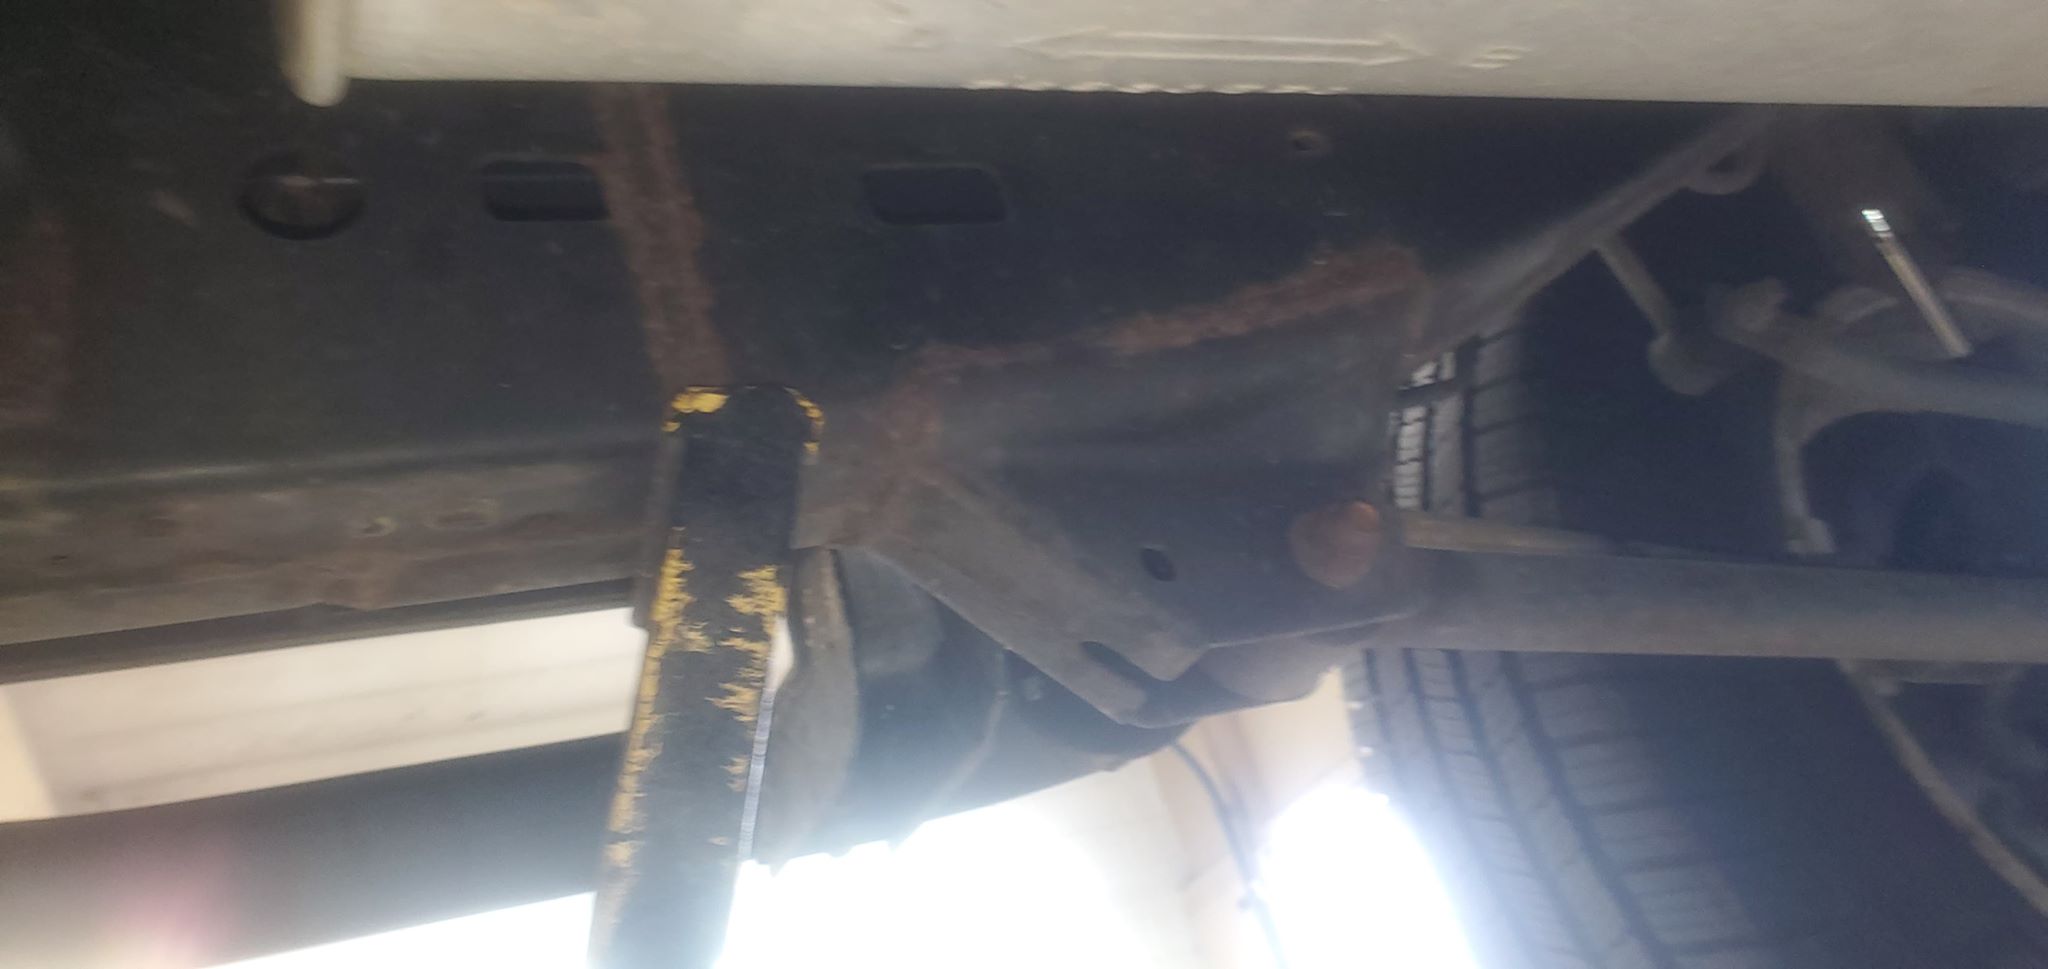 How much is too much rust on a 2006 4Runner?-82155205_474096970201070_1727861018148732928_n-jpg